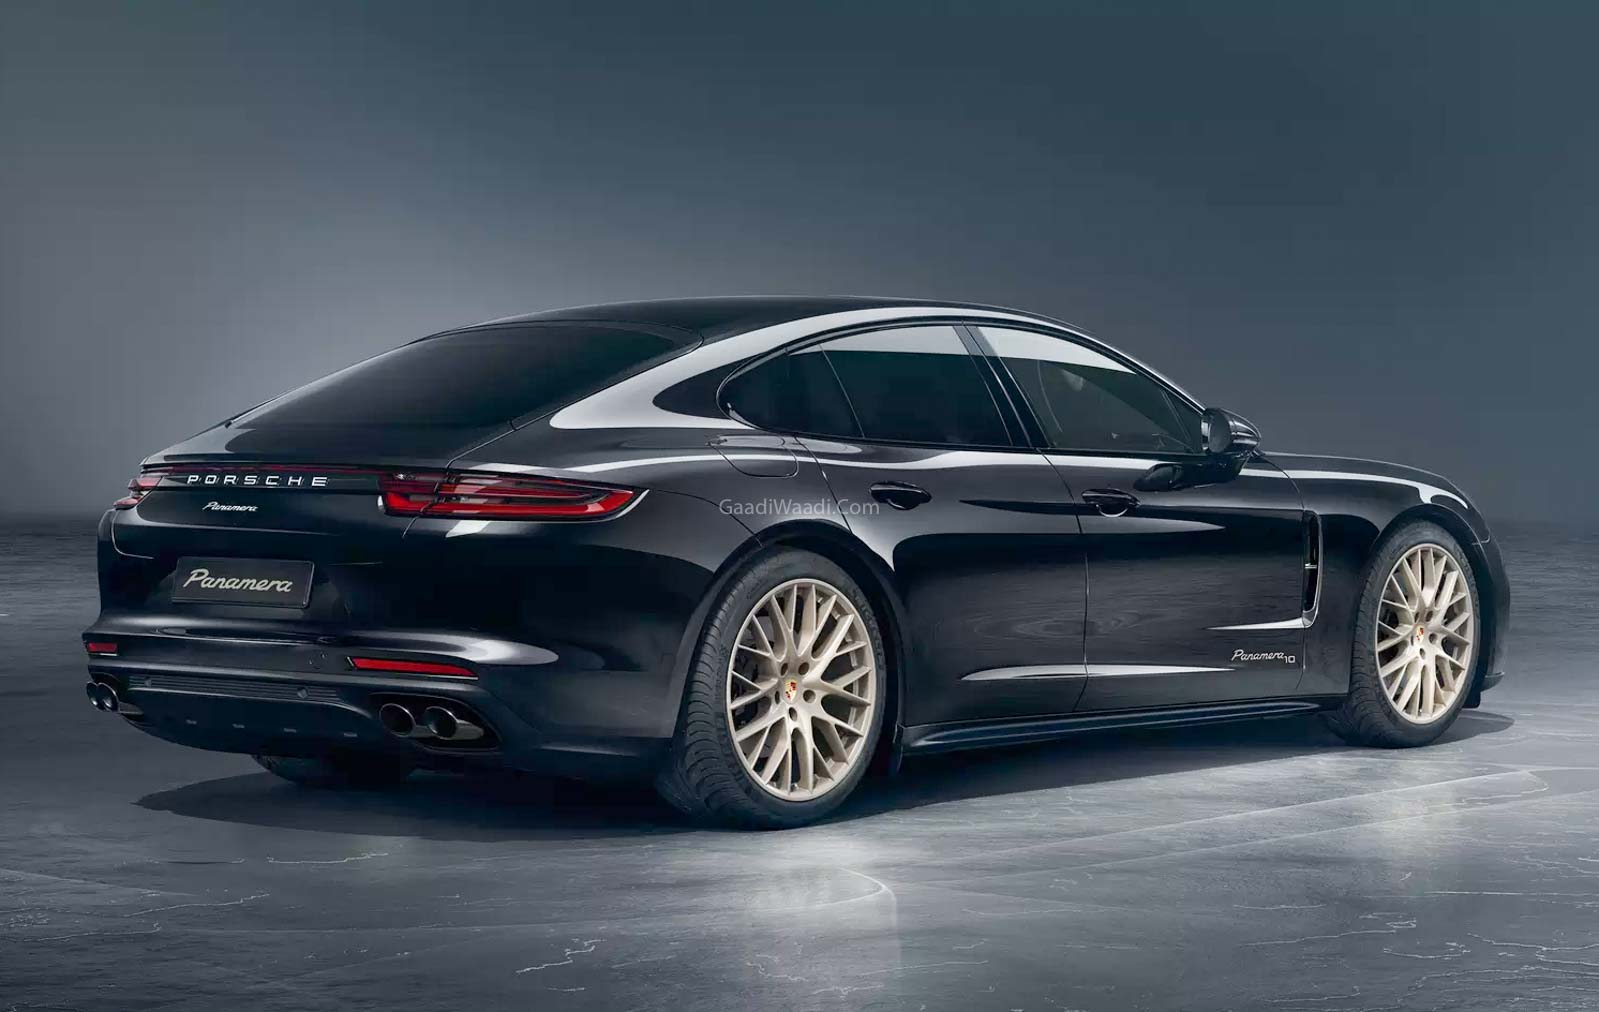 Porsche Panamera 4 10 Years Edition Introduced At Rs 1.6 